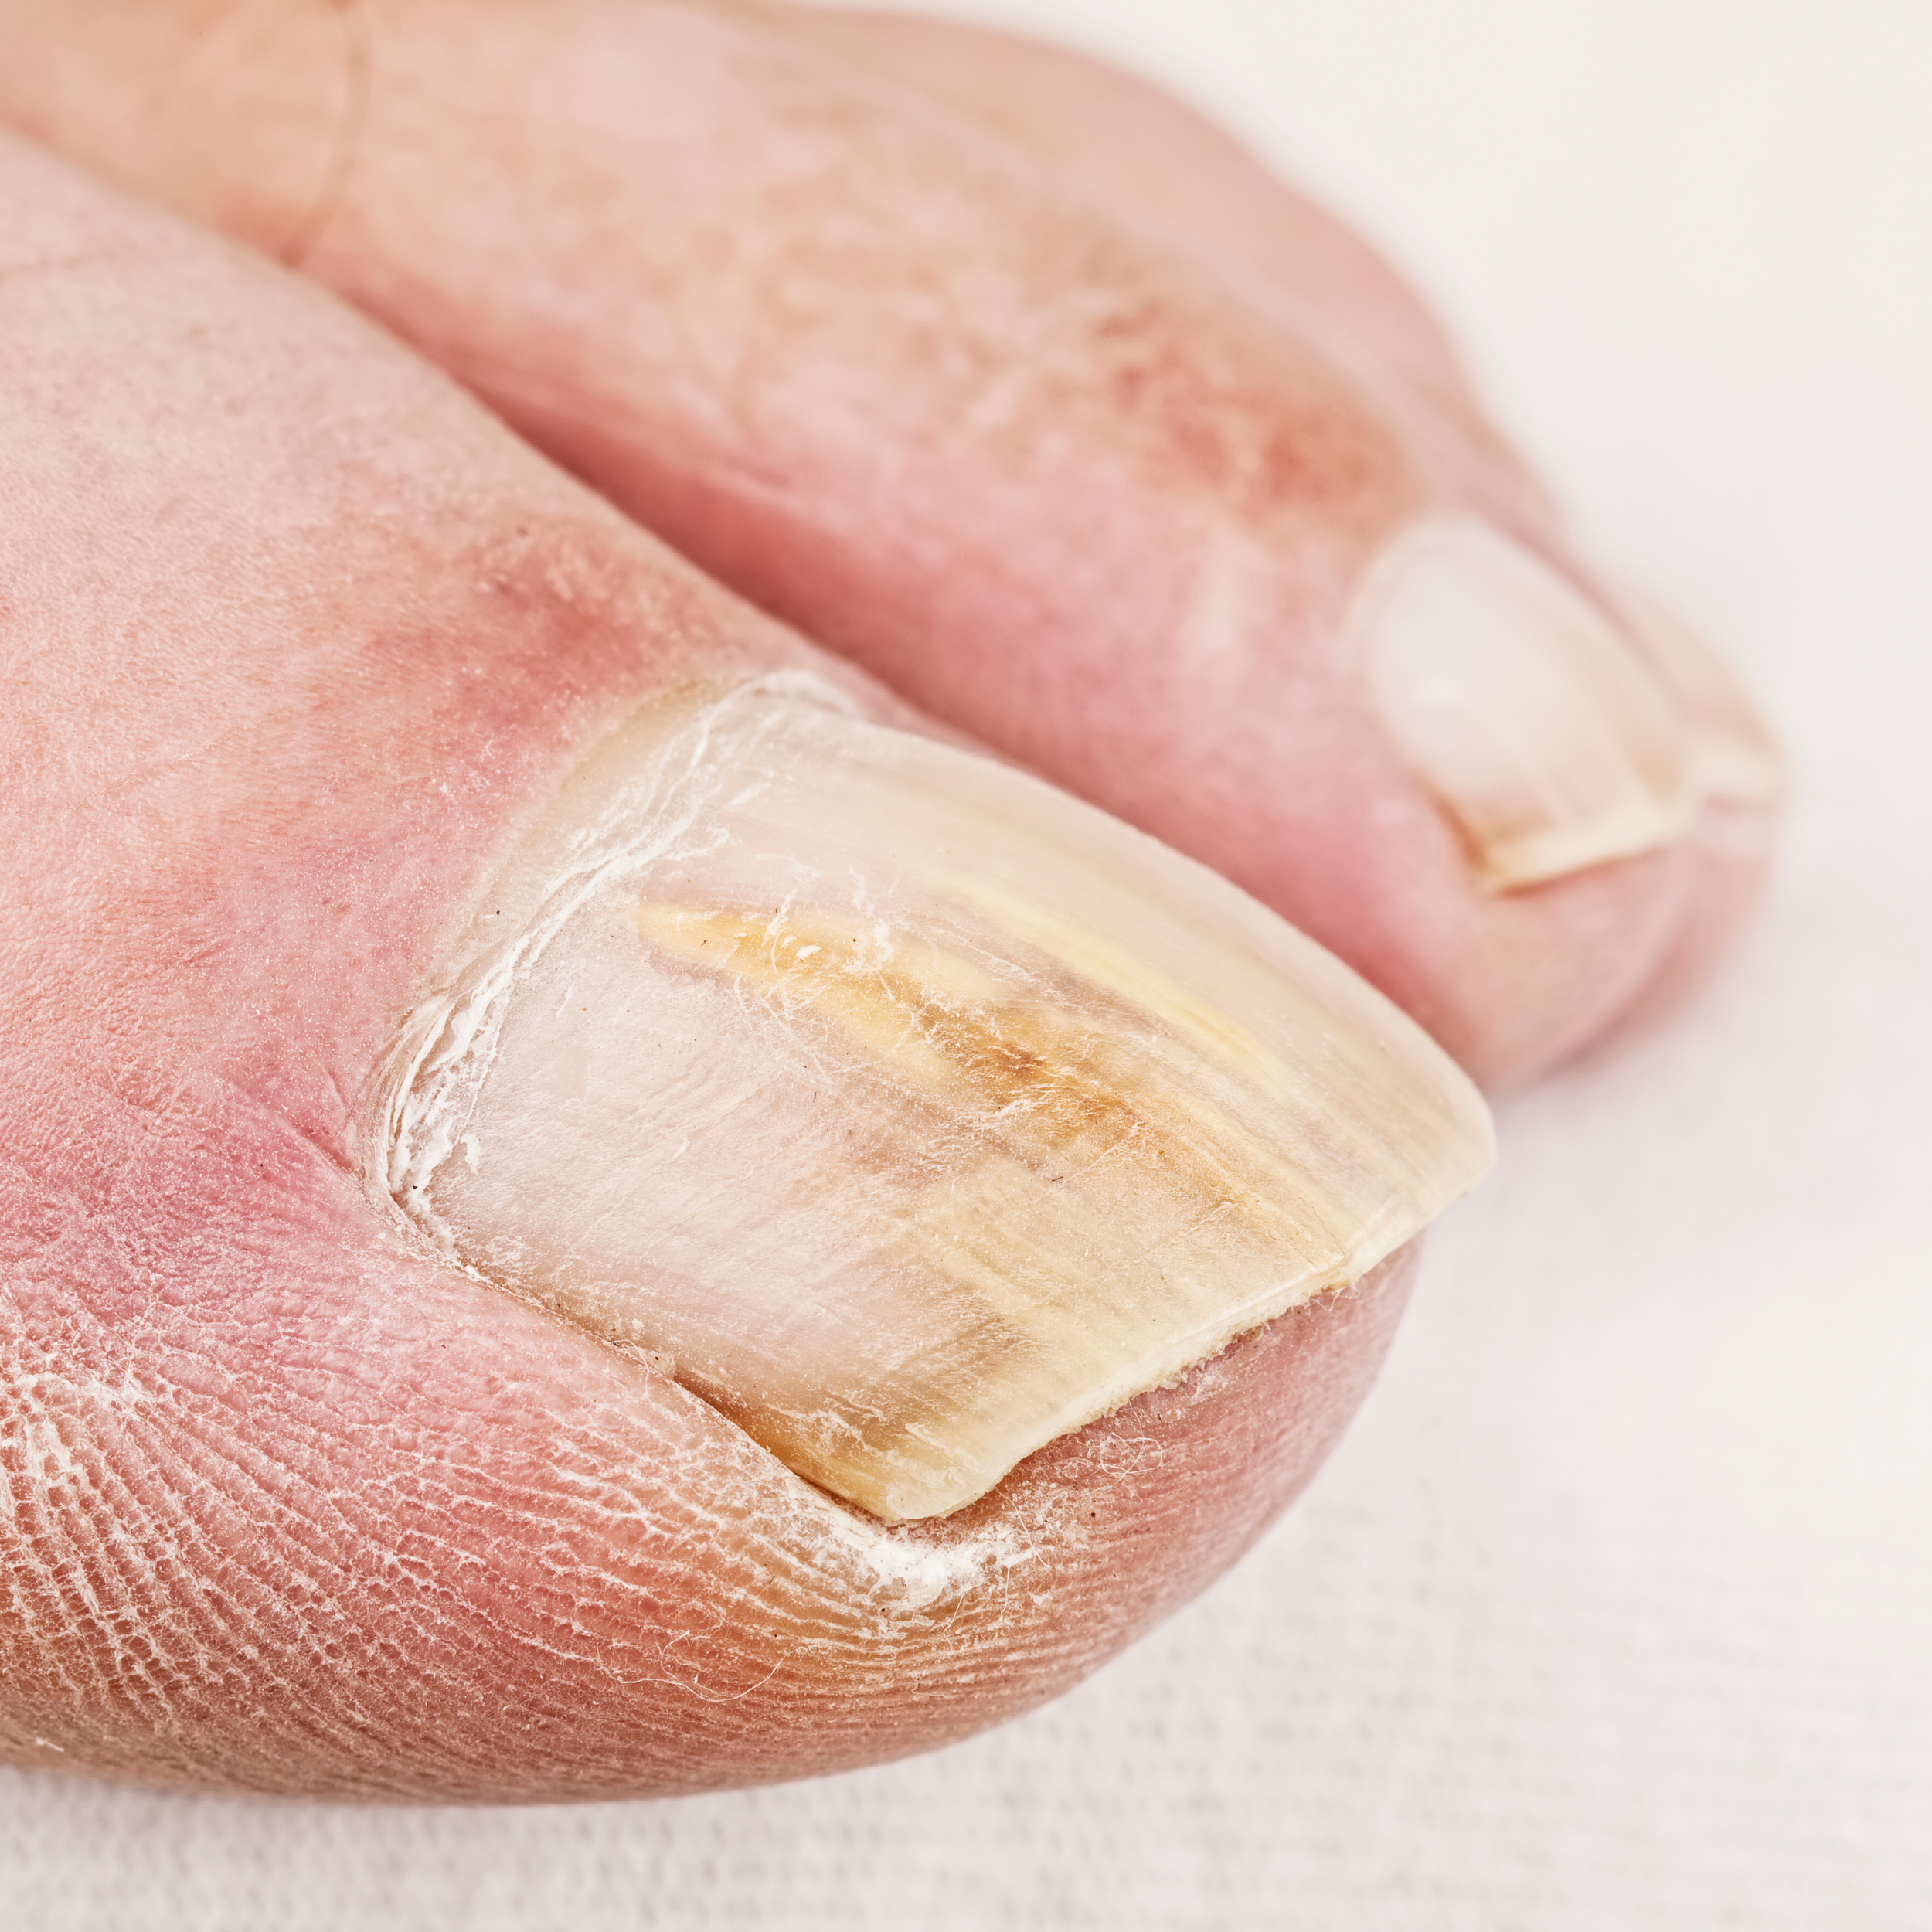 FAREWELL TO FUNGAL NAIL INFECTIONS